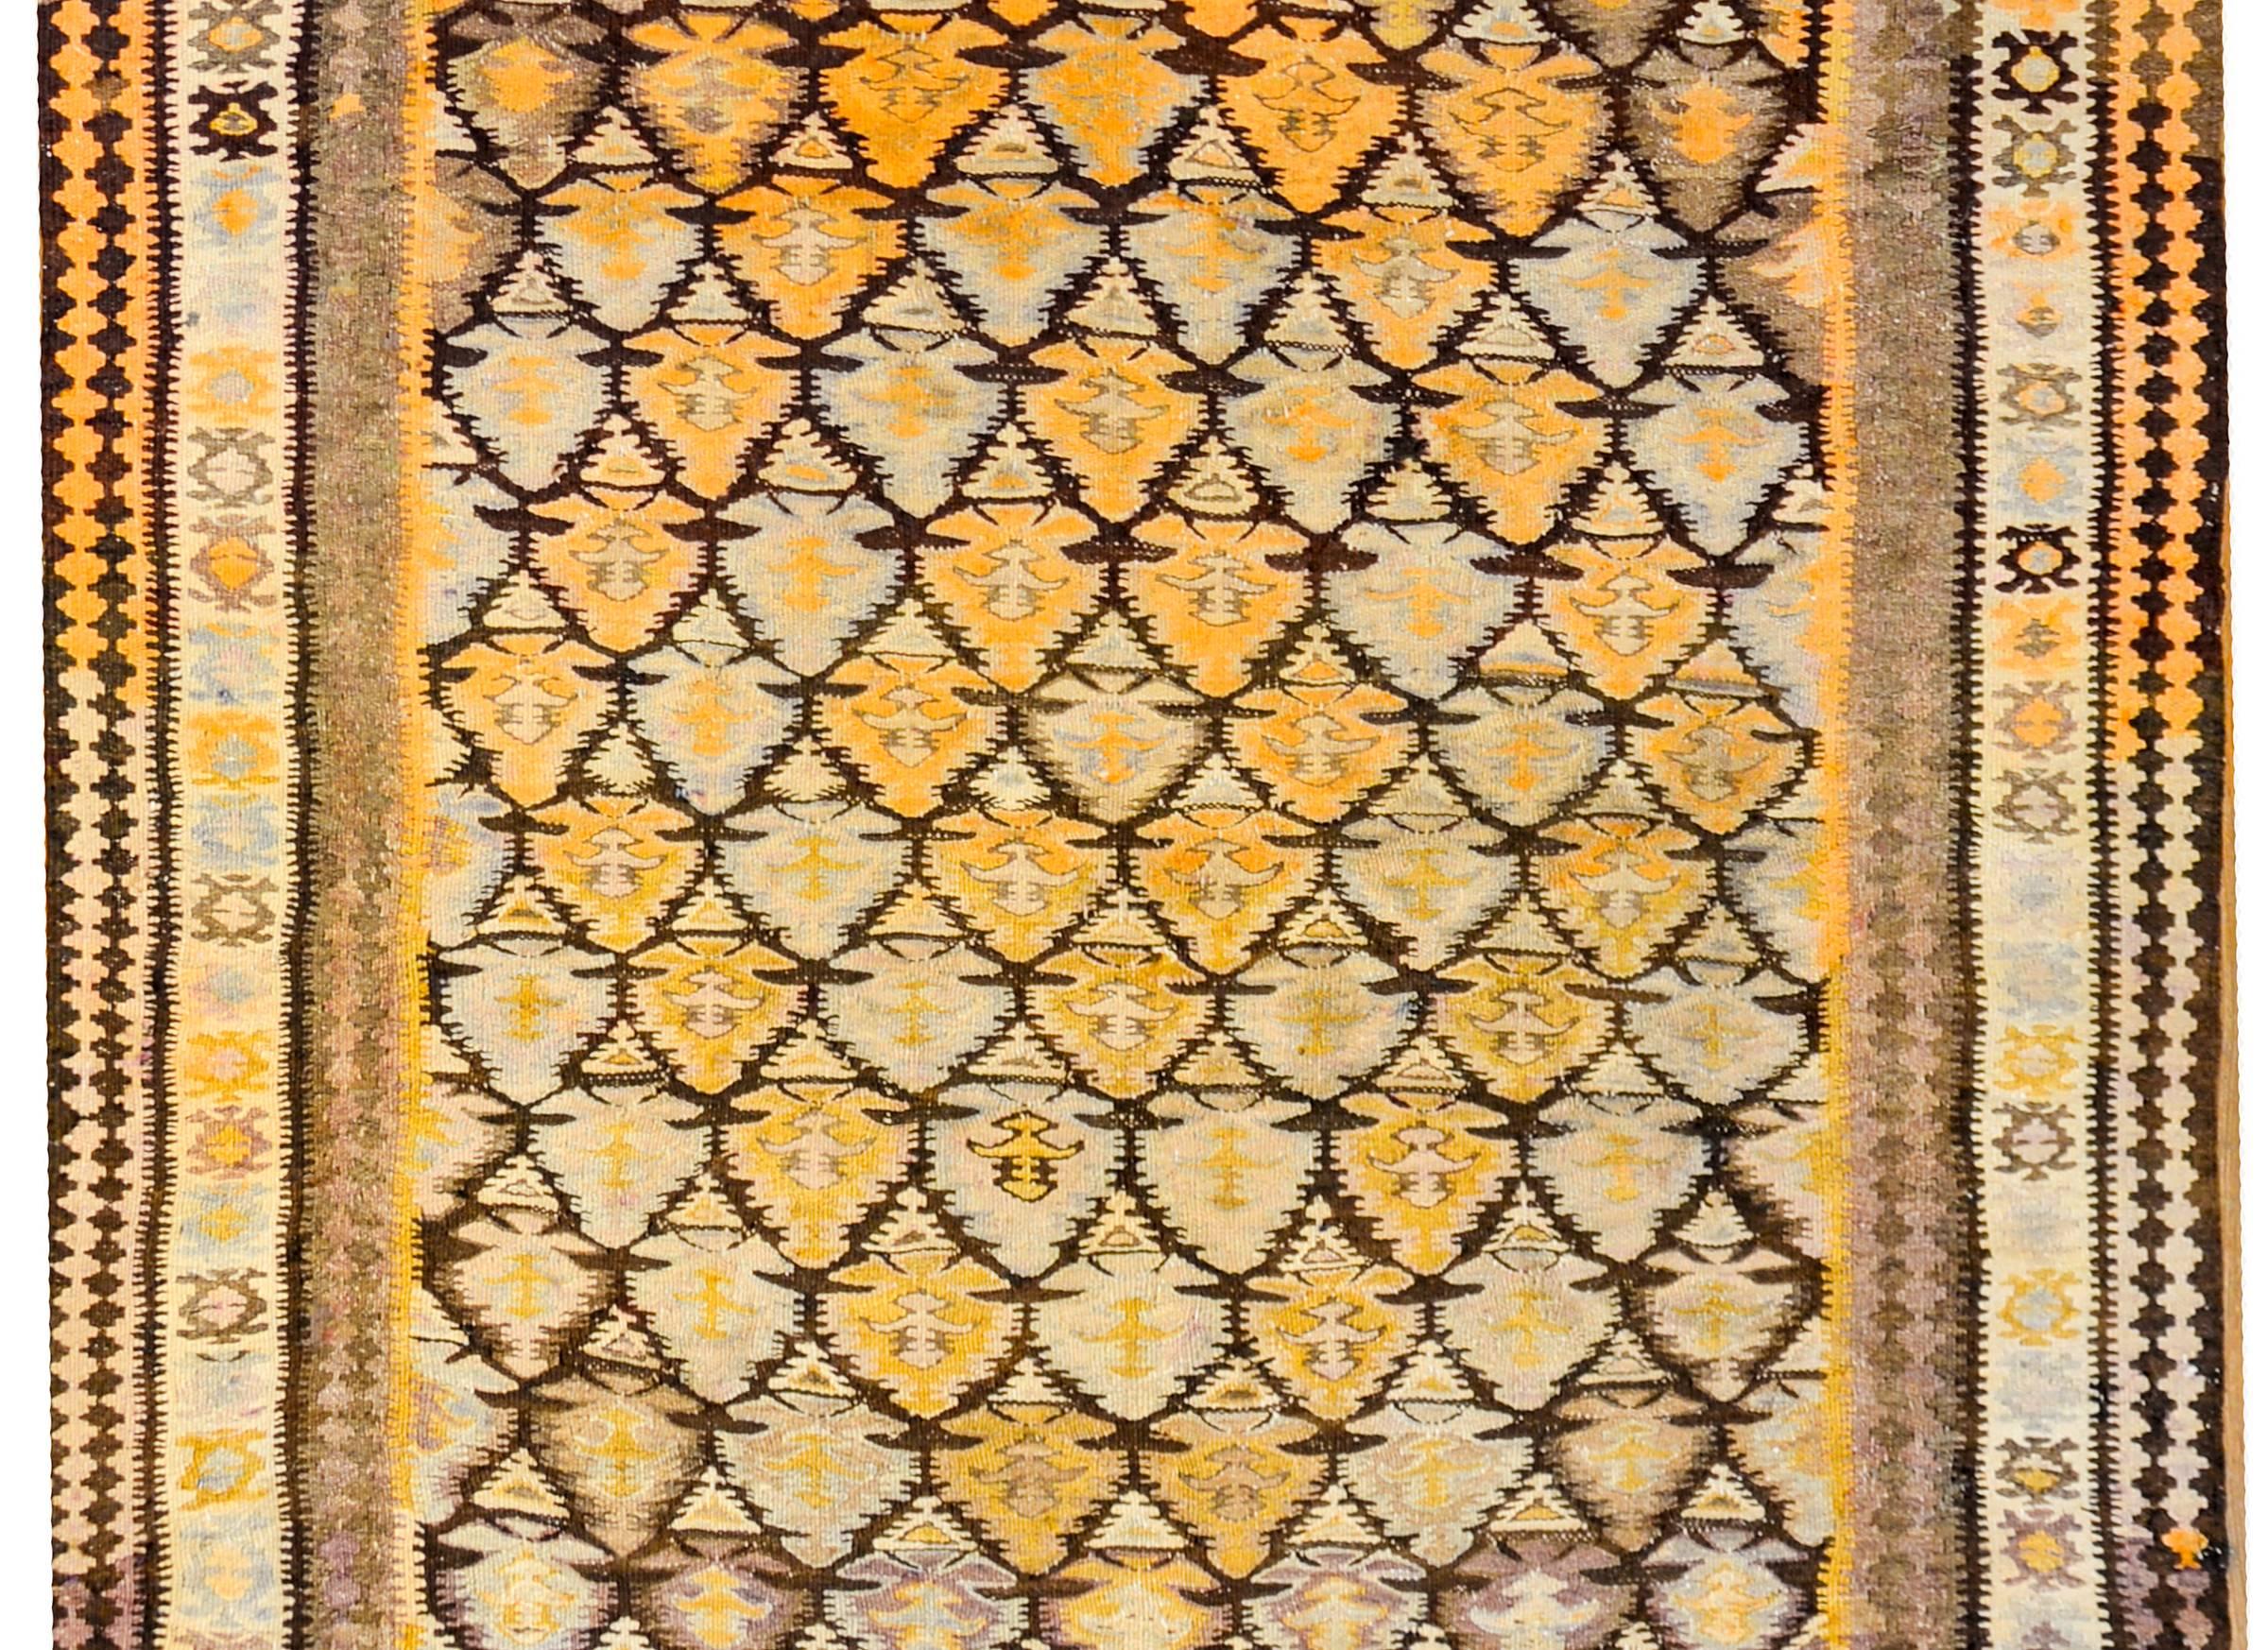 An amazing early 20th century Persian Qazvin Kilim rug with an all-over tree-of-life pattern woven with orange, lilac and natural wool colored vegetable dyed wool. The border is complex, with three distinct geometric patterns, with the central